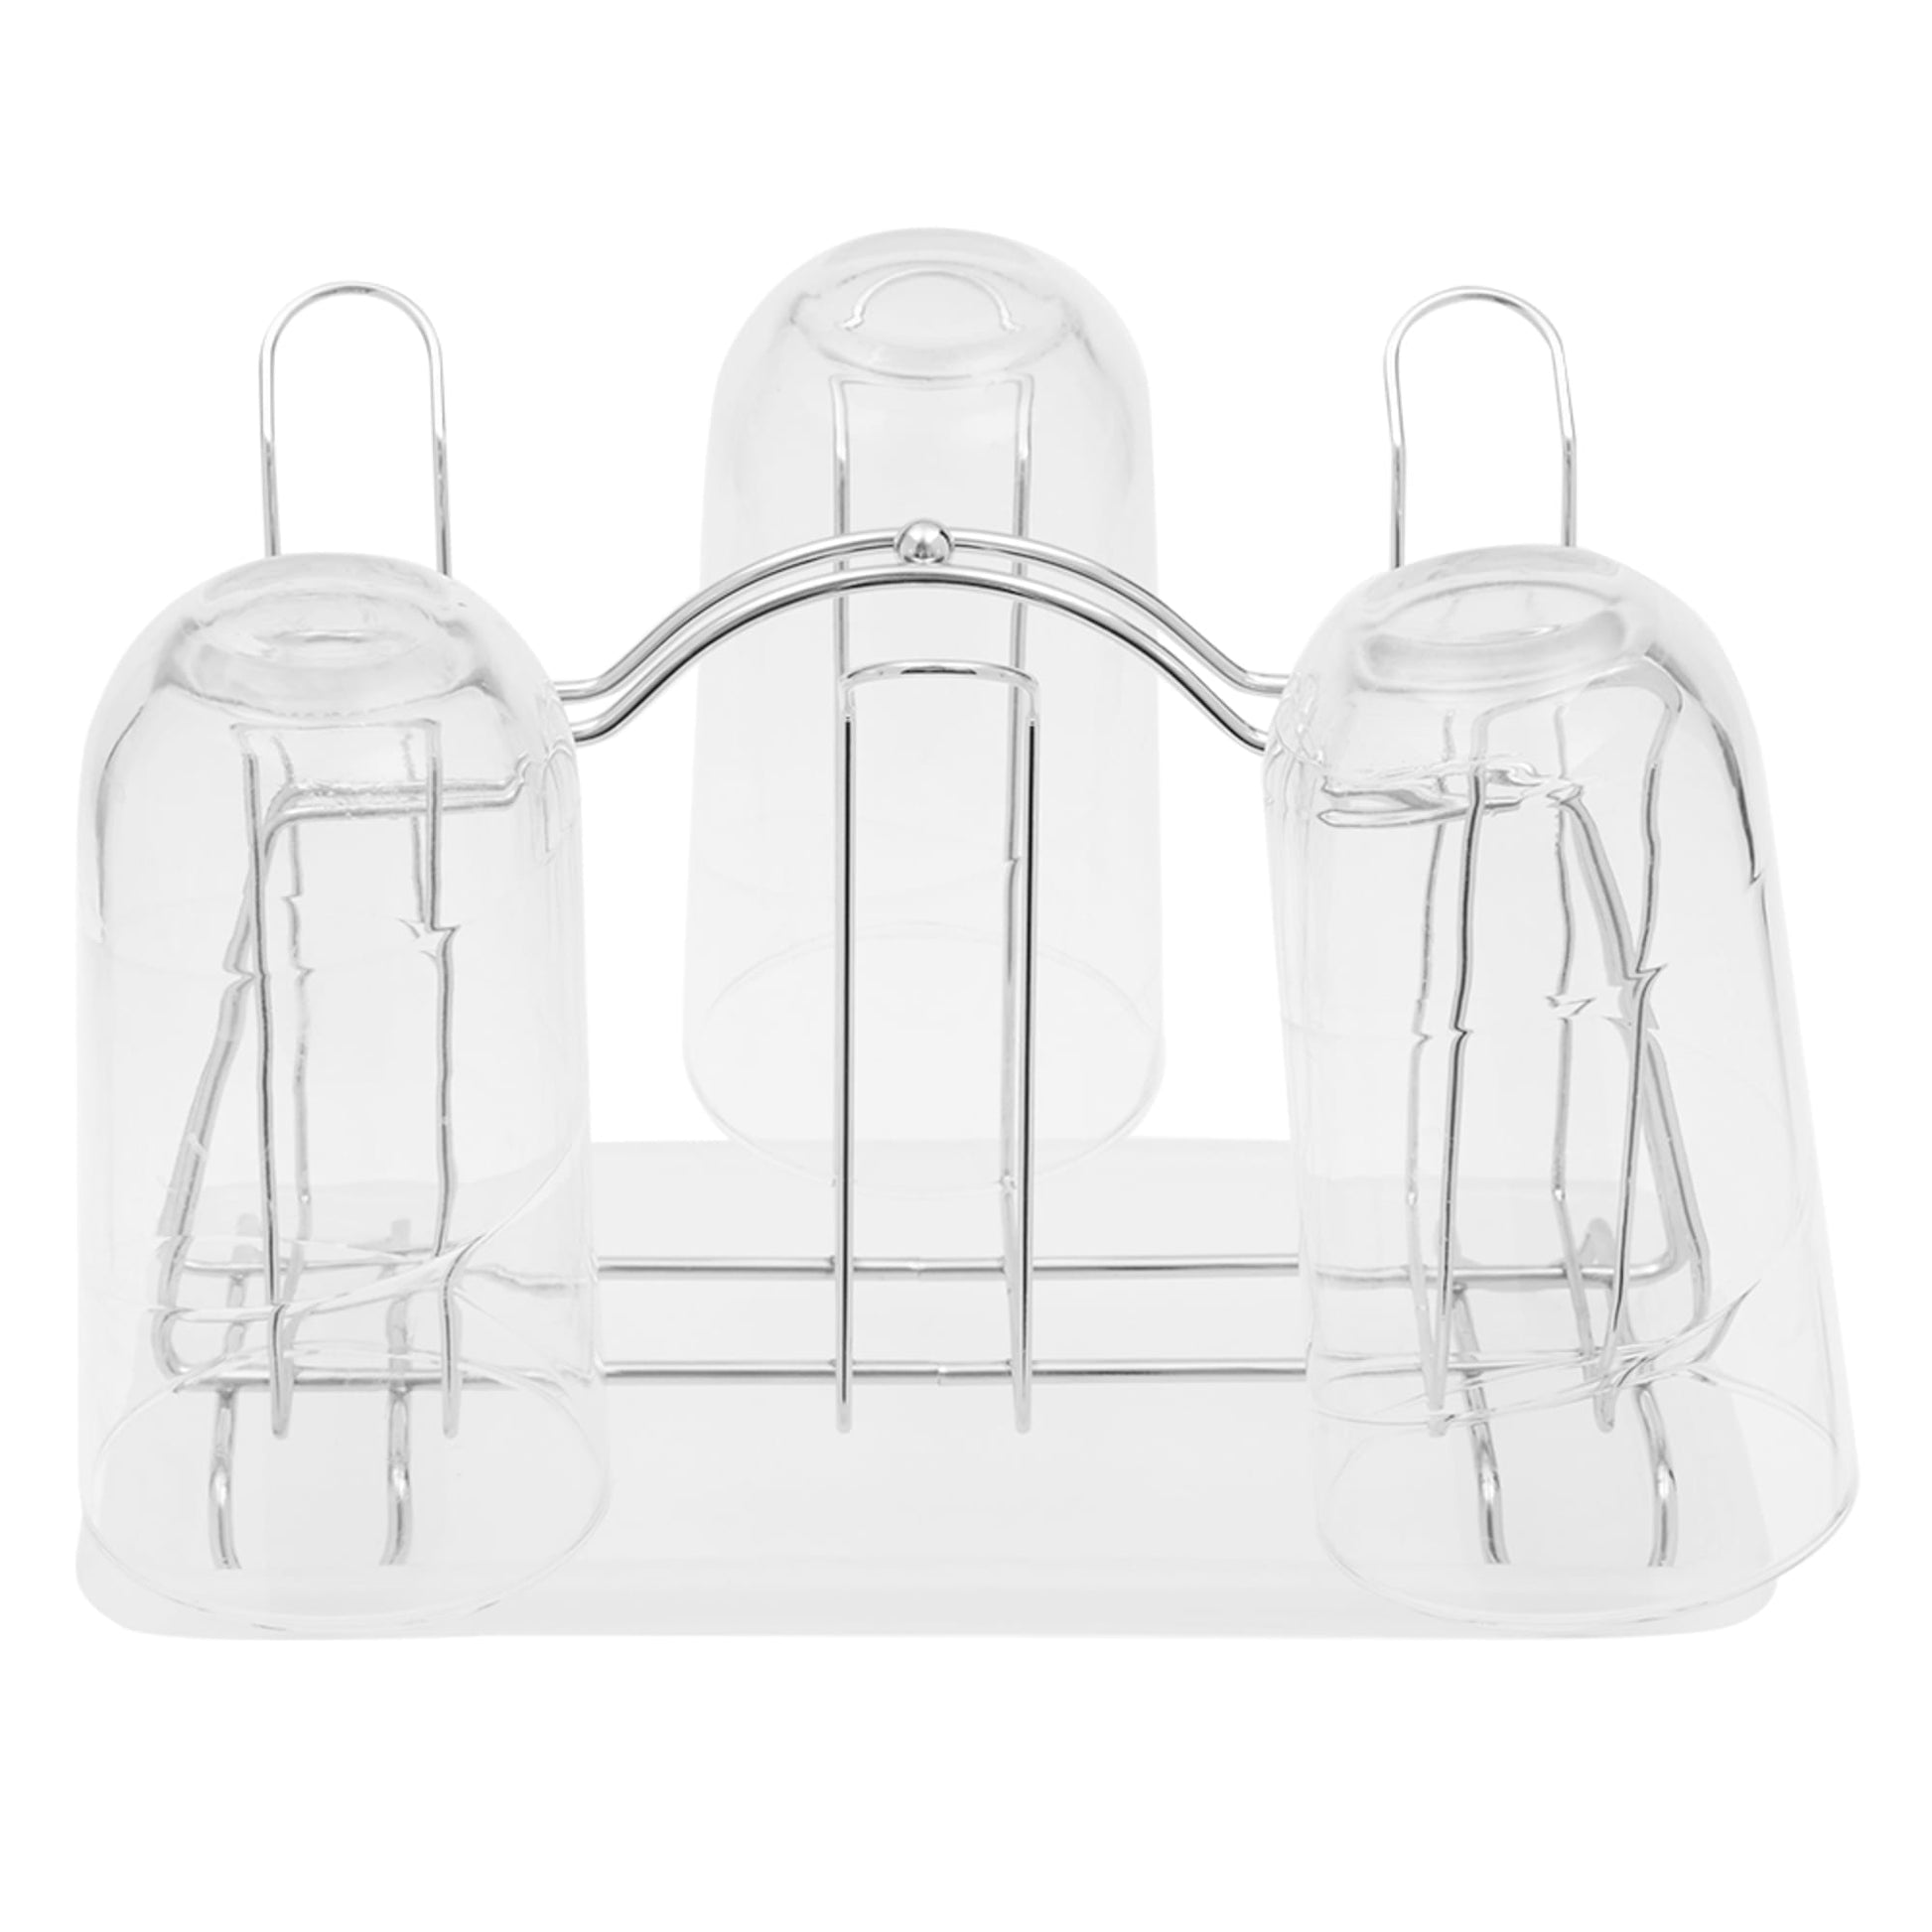 Lyellfe 2 Pack Cup Drying Rack, Glass Bottle Holder with Drain Tray,  Silicone Protective Hooks, Carbon Steel Non Slip Cup Mug Organizer Tree for